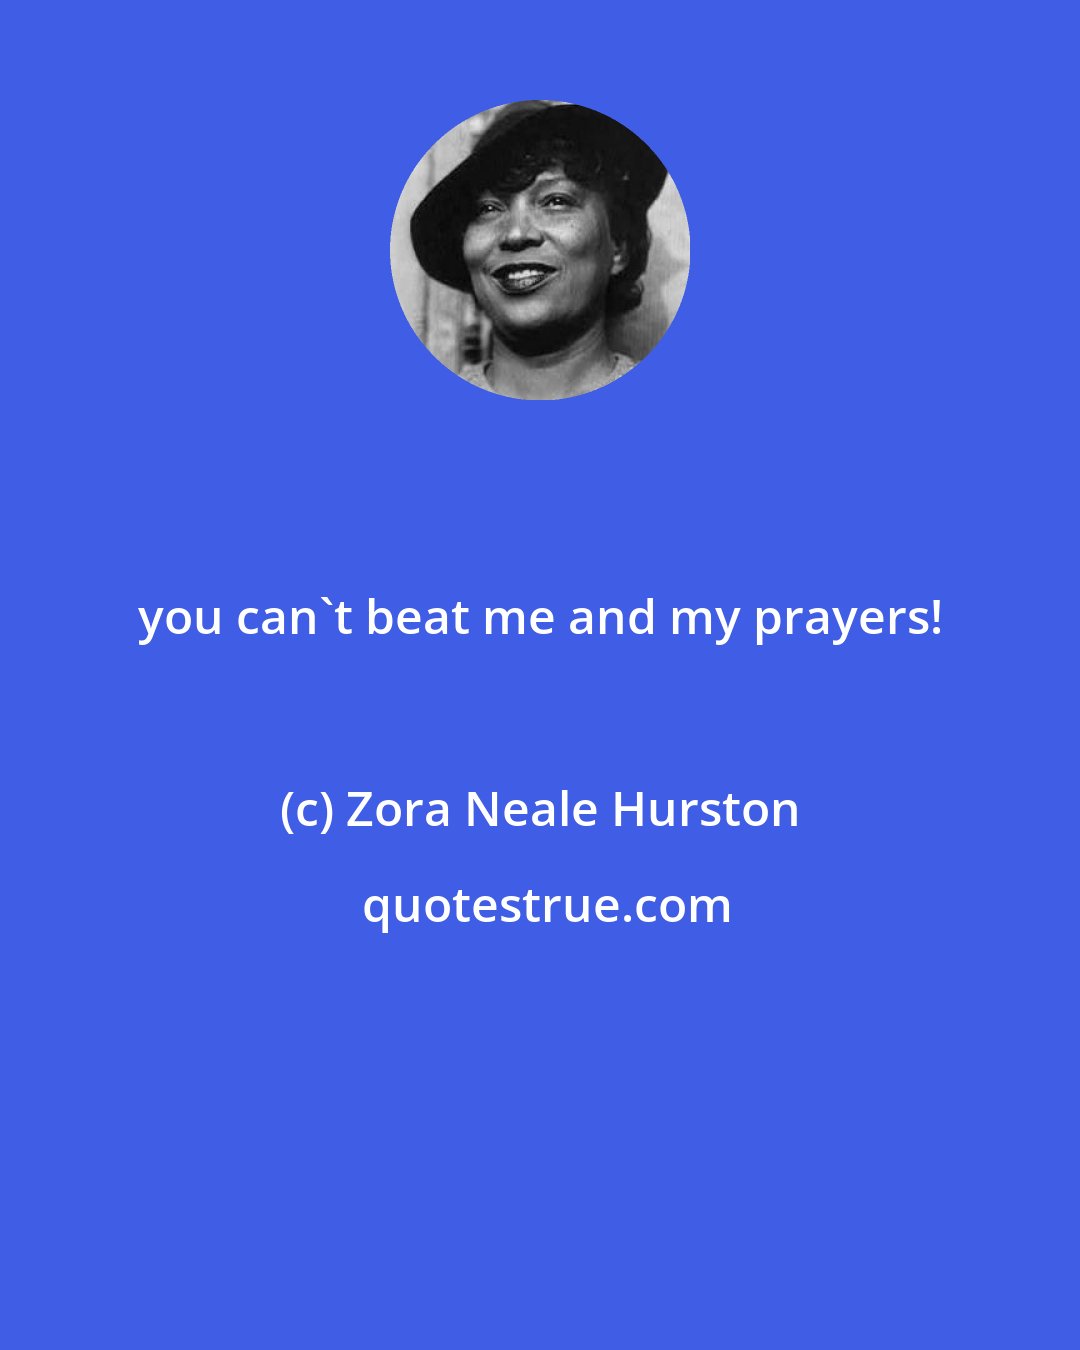 Zora Neale Hurston: you can't beat me and my prayers!